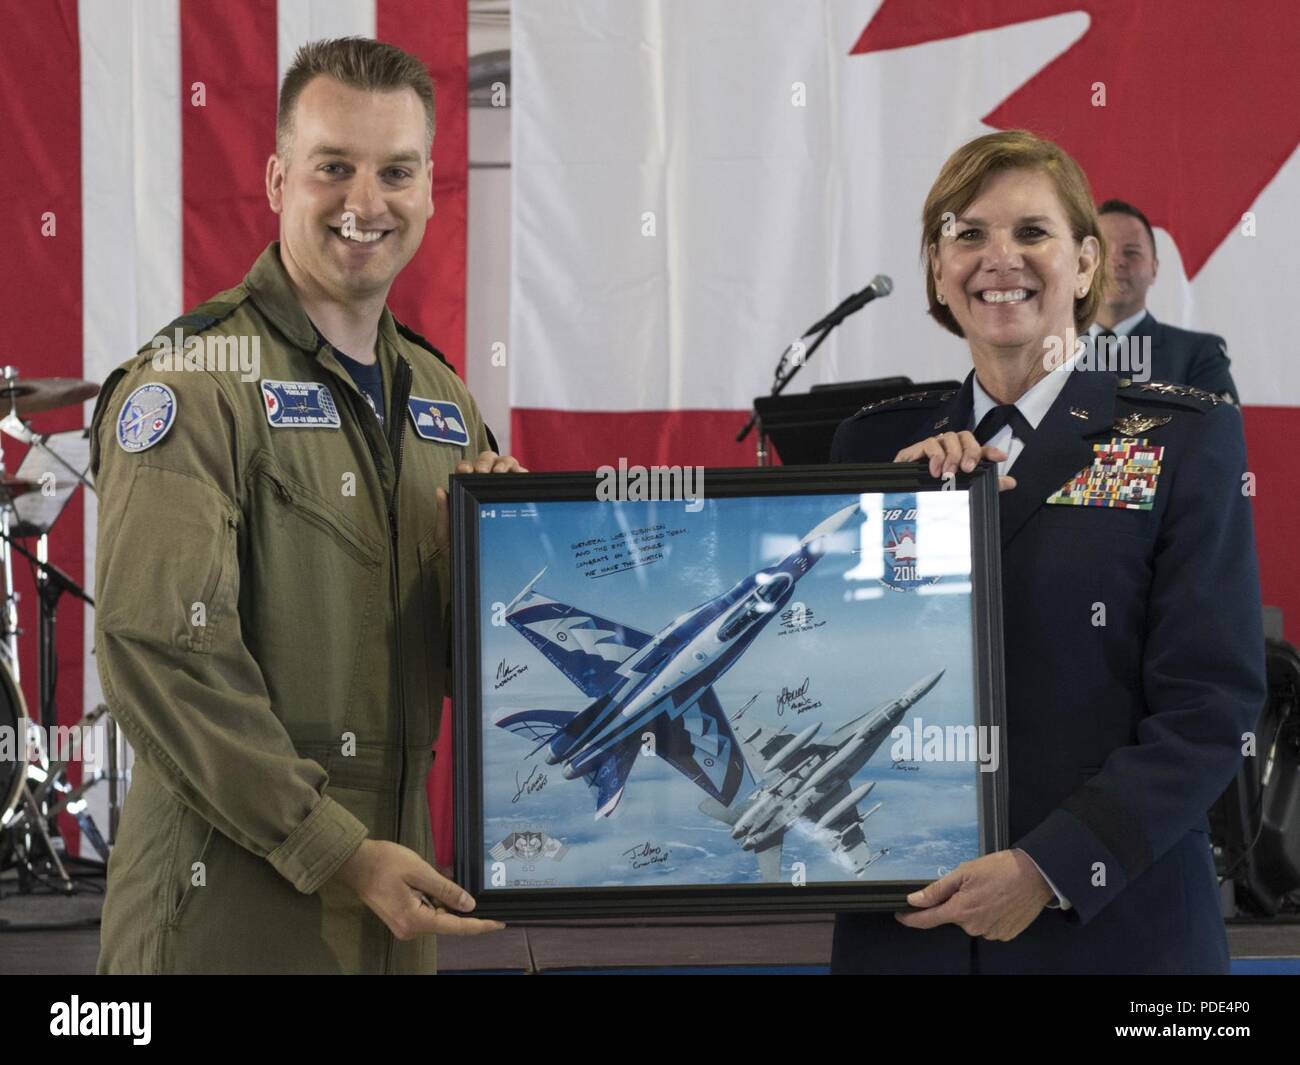 Royal Canadian Air Force Capt. Stephan Porteus presents Gen. Lori J. Robinson, commander of North American Aerospace Defense Command and U.S. Northern Command, with a lithograph at the NORAD 60th Anniversary Ceremony on Peterson Air Force Base Colorado, May 12, 2018. The ceremony and static display of various NORAD aircraft was the culmination of a three-day event, which included a media tour of Cheyenne Mountain Air Force Station, the dedication of a cairn outside the commands' headquarters building memorializing the Canadians who have passed away while serving NORAD, and a fly over in missin Stock Photo